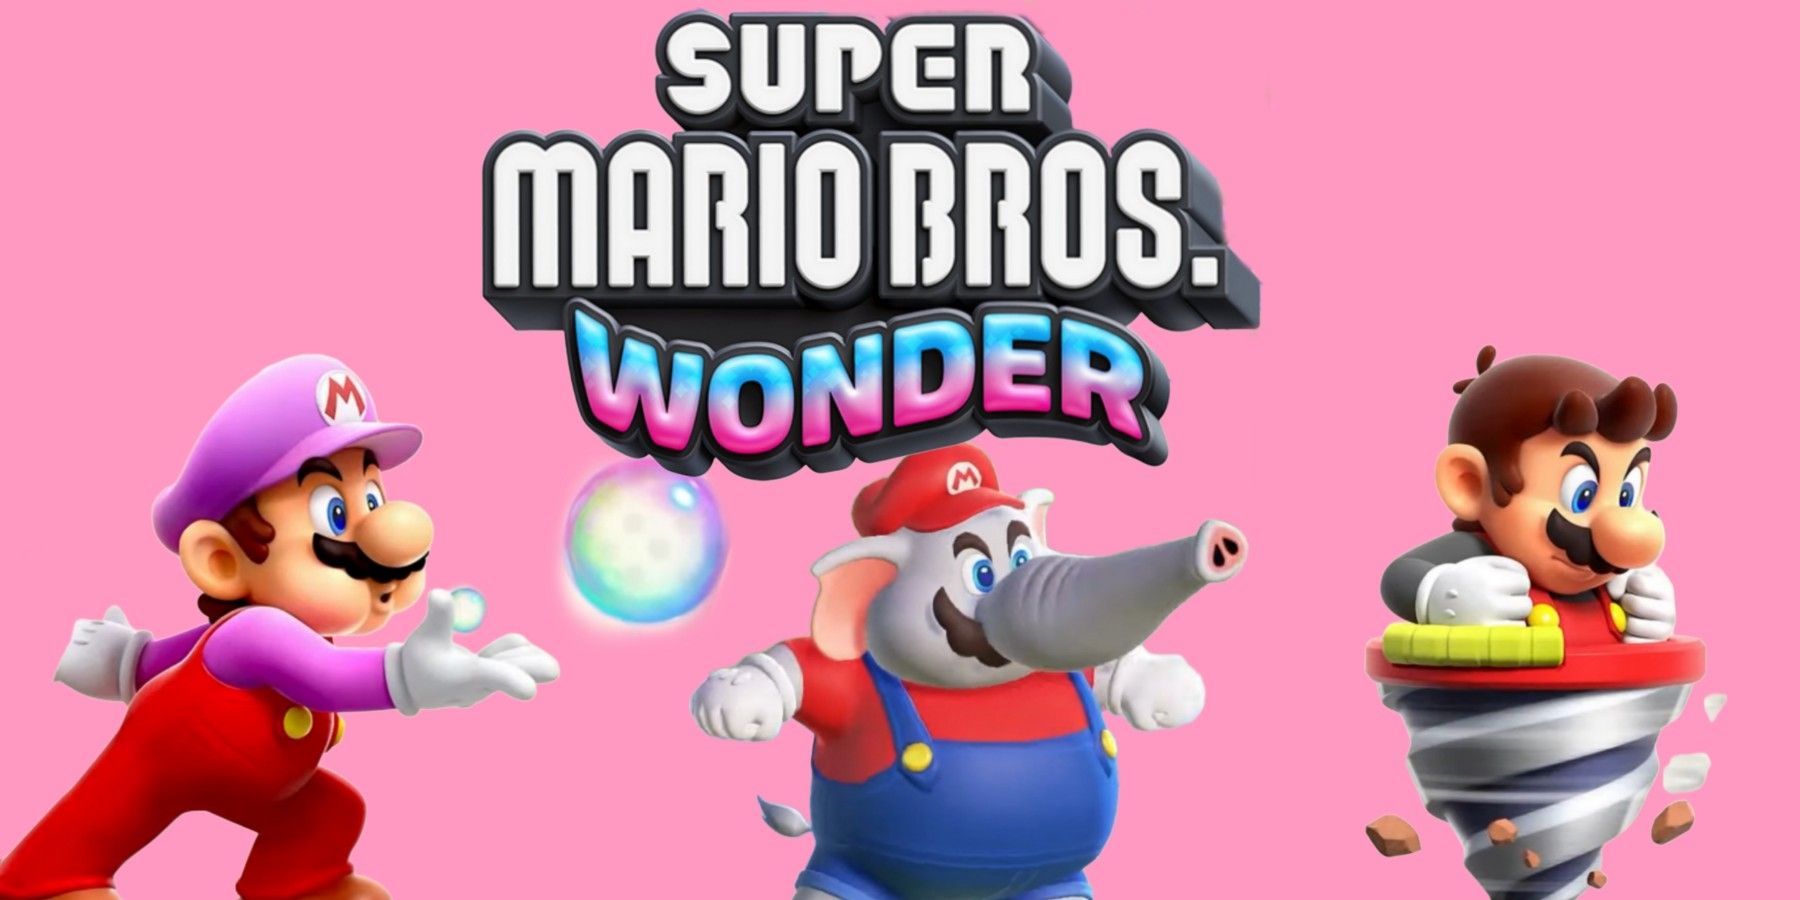 Super Mario Bros. Wonder is 2D and out in October with Mario elephant